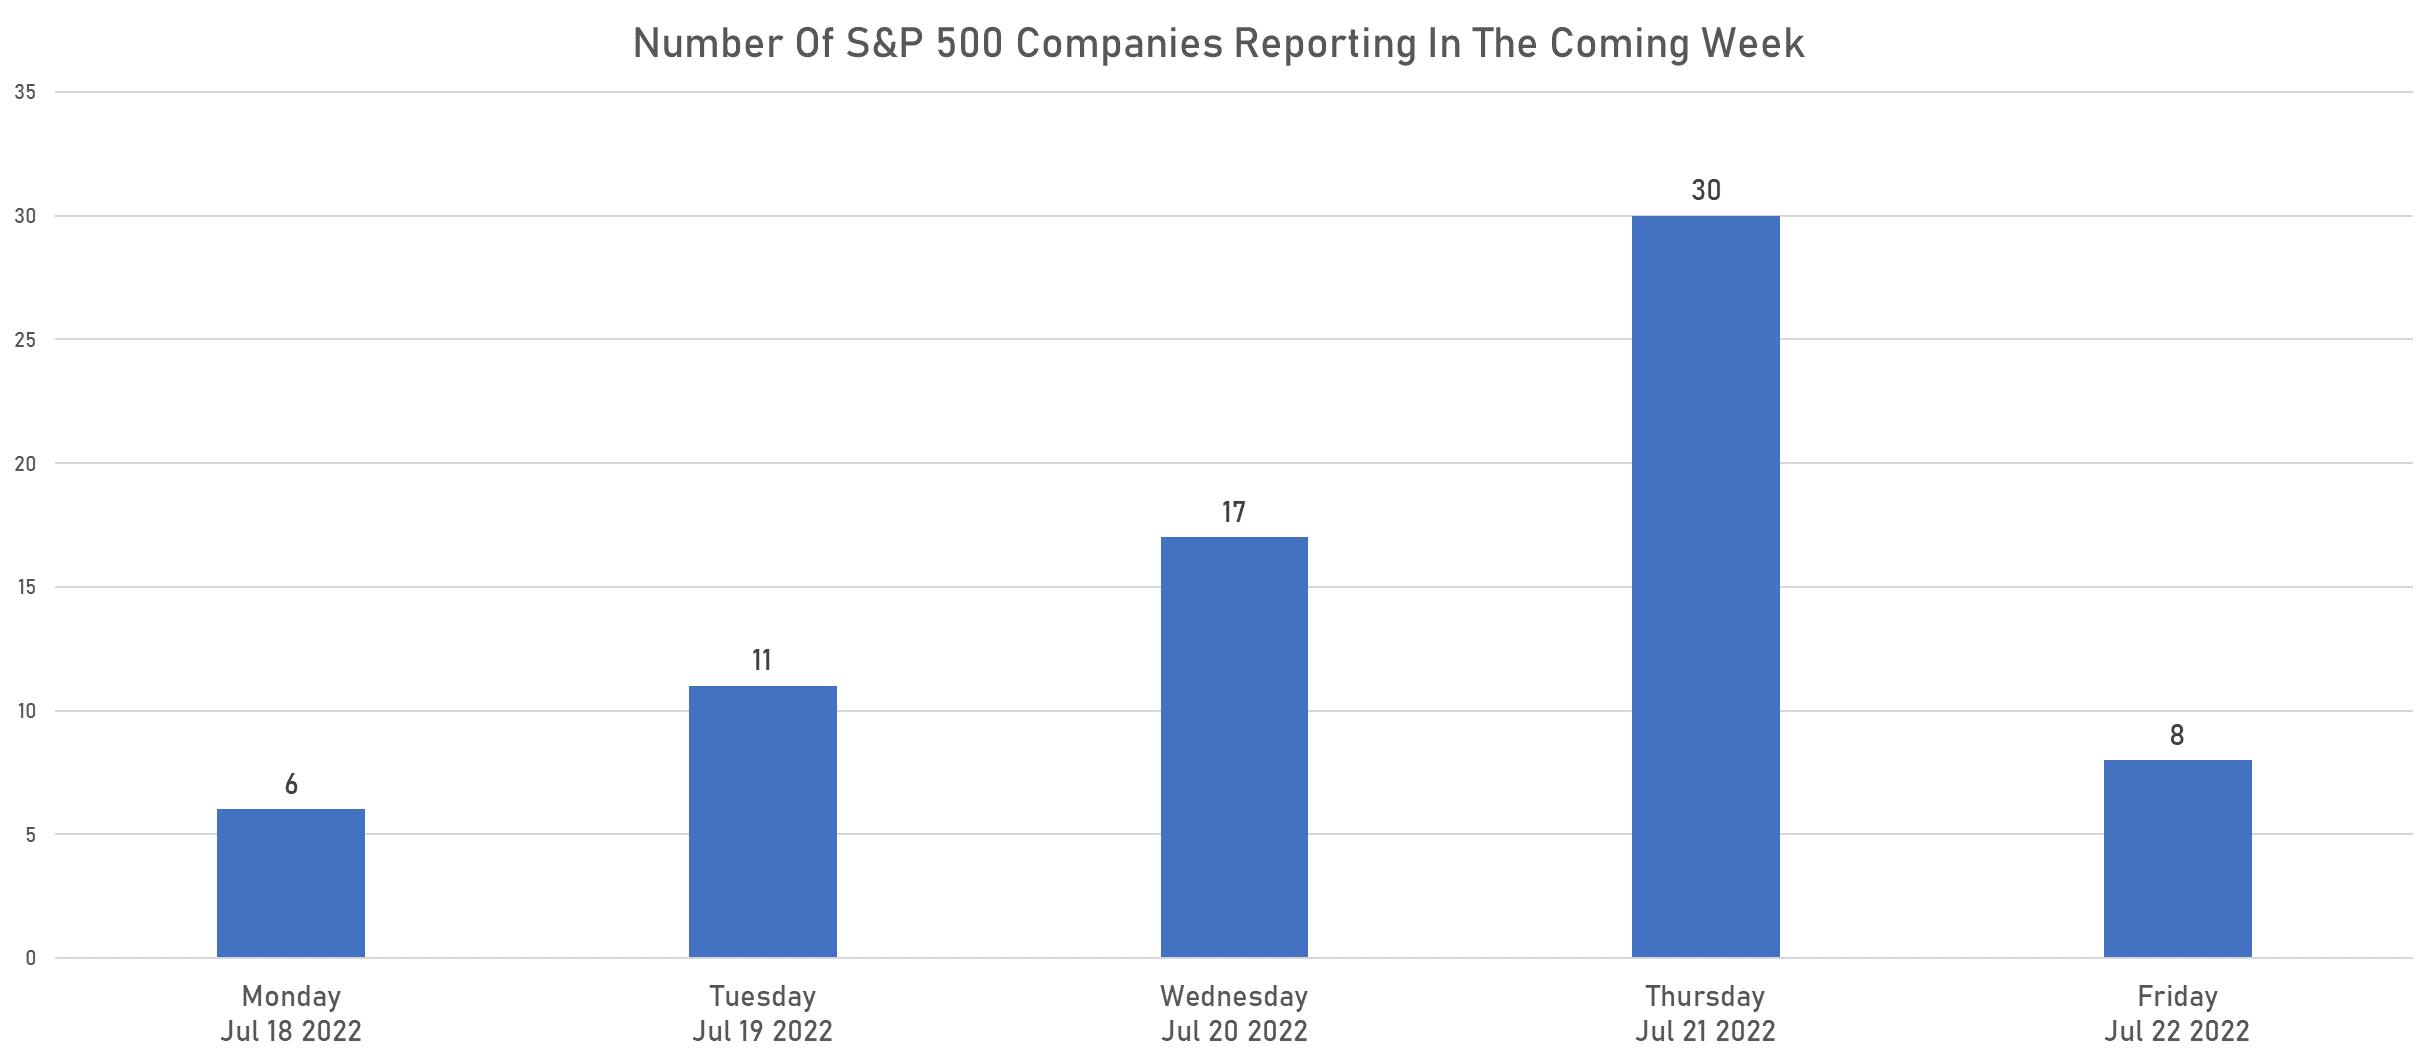 Number of S&P 500 companies reporting next week | Sources: phipost.com, Refinitiv data